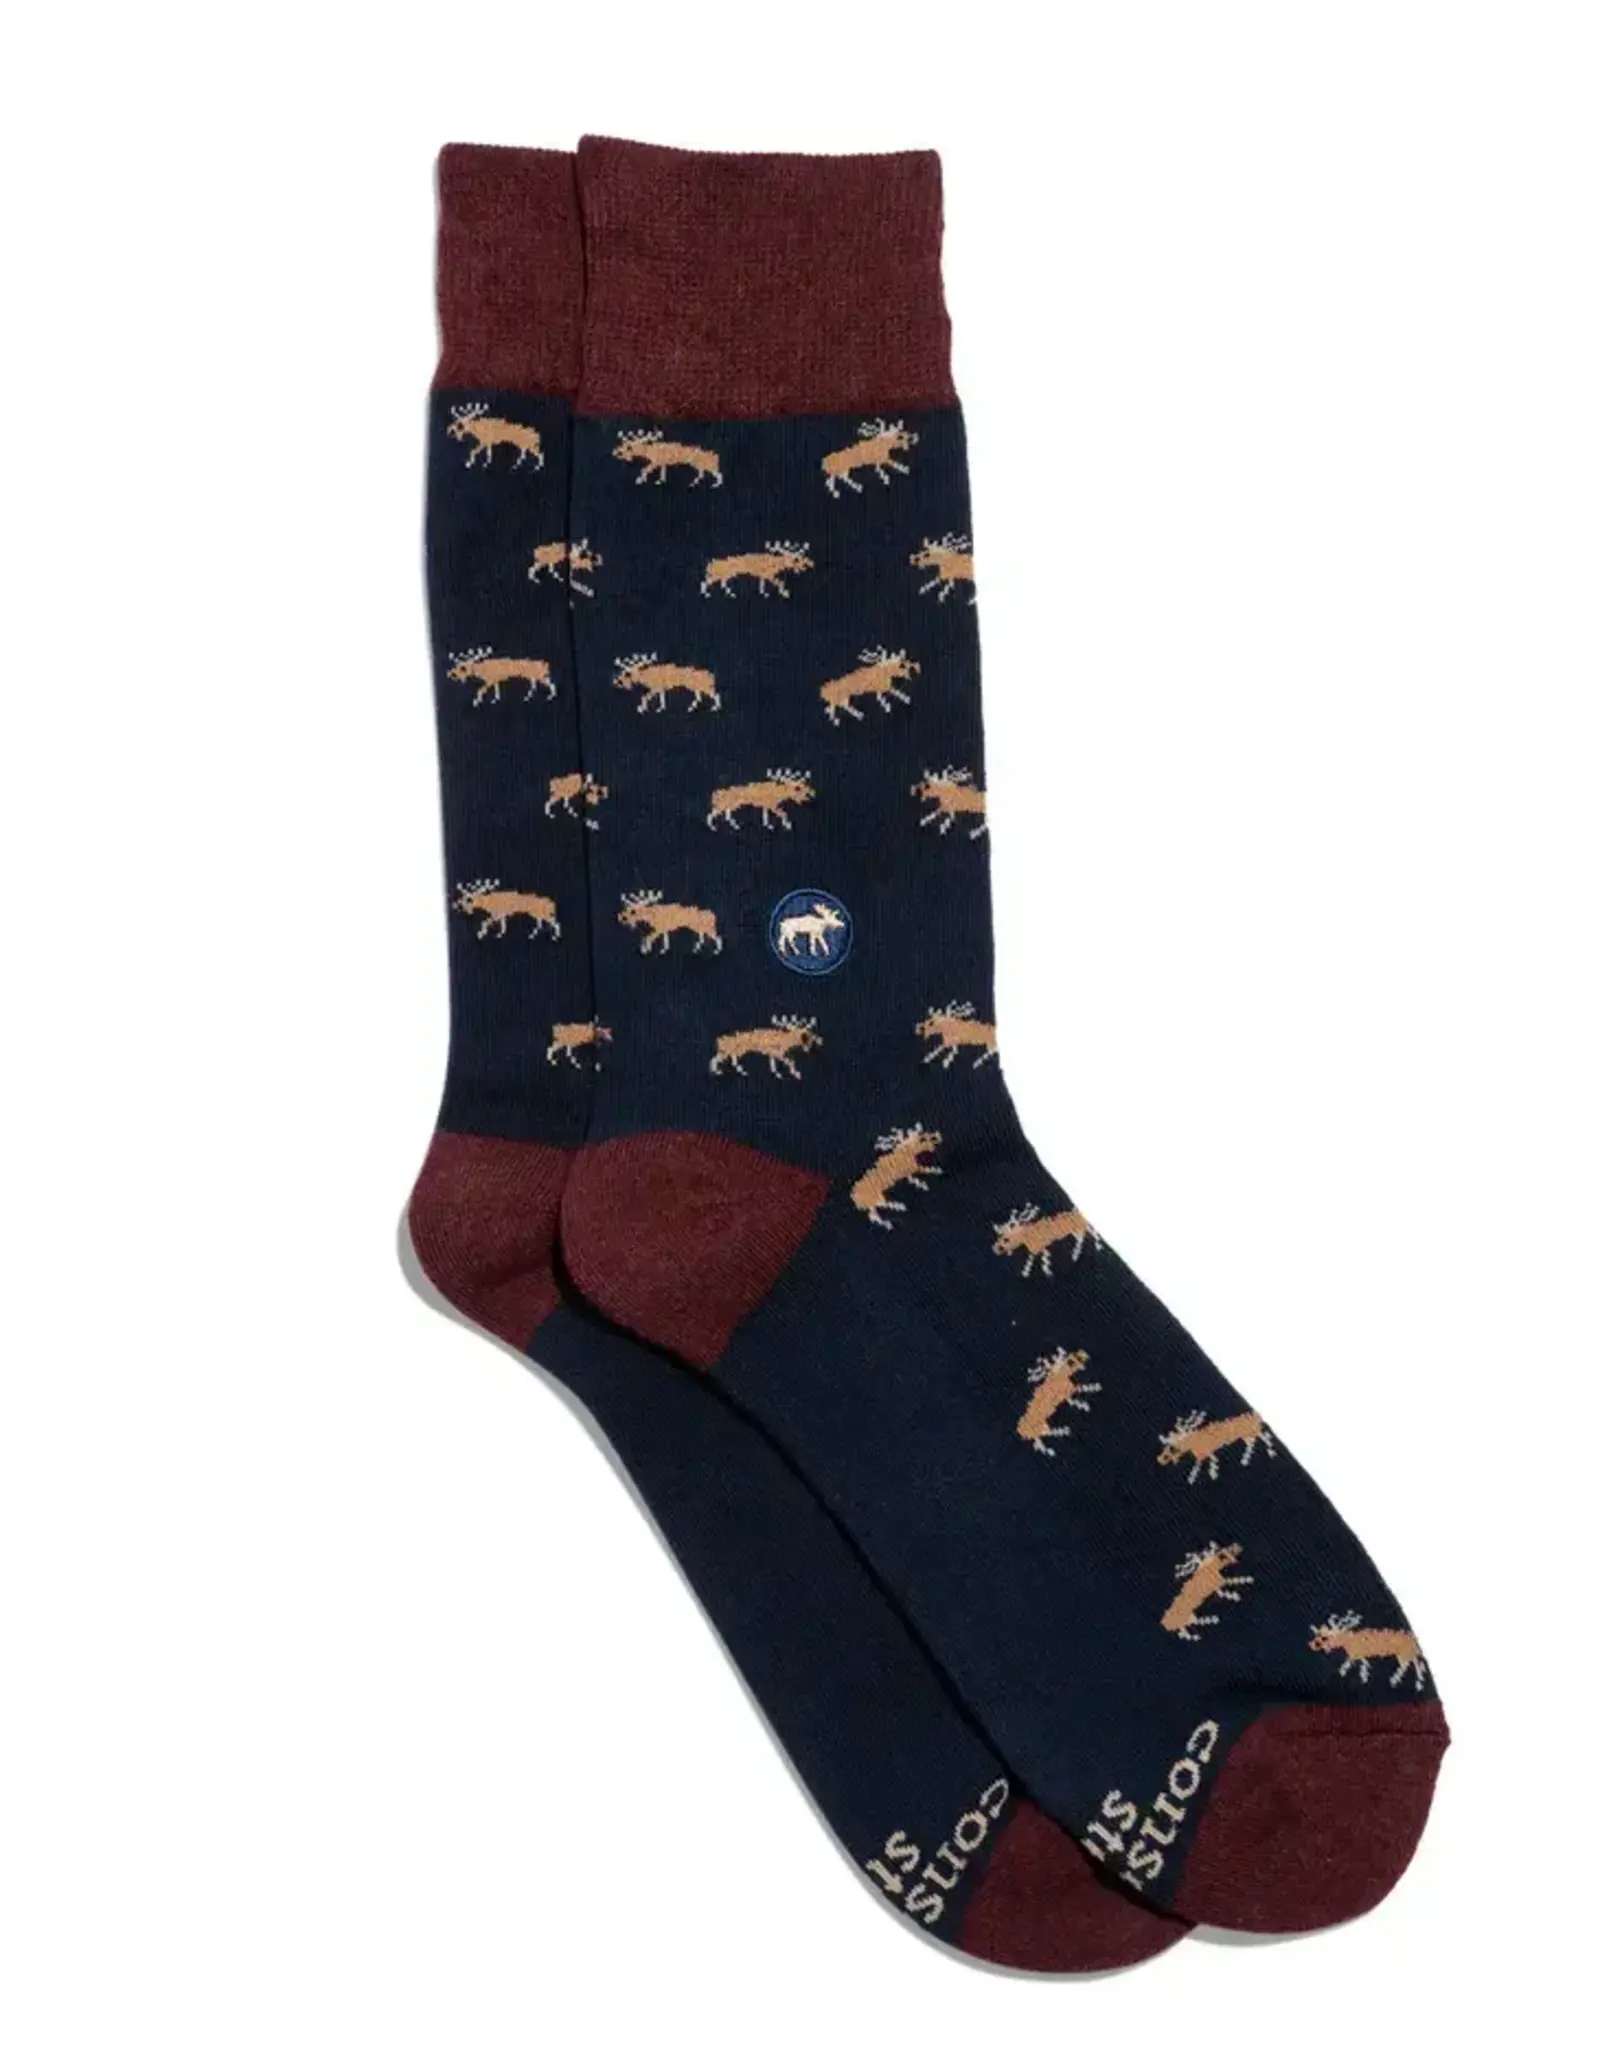 Conscious Step Socks that Protect Moose